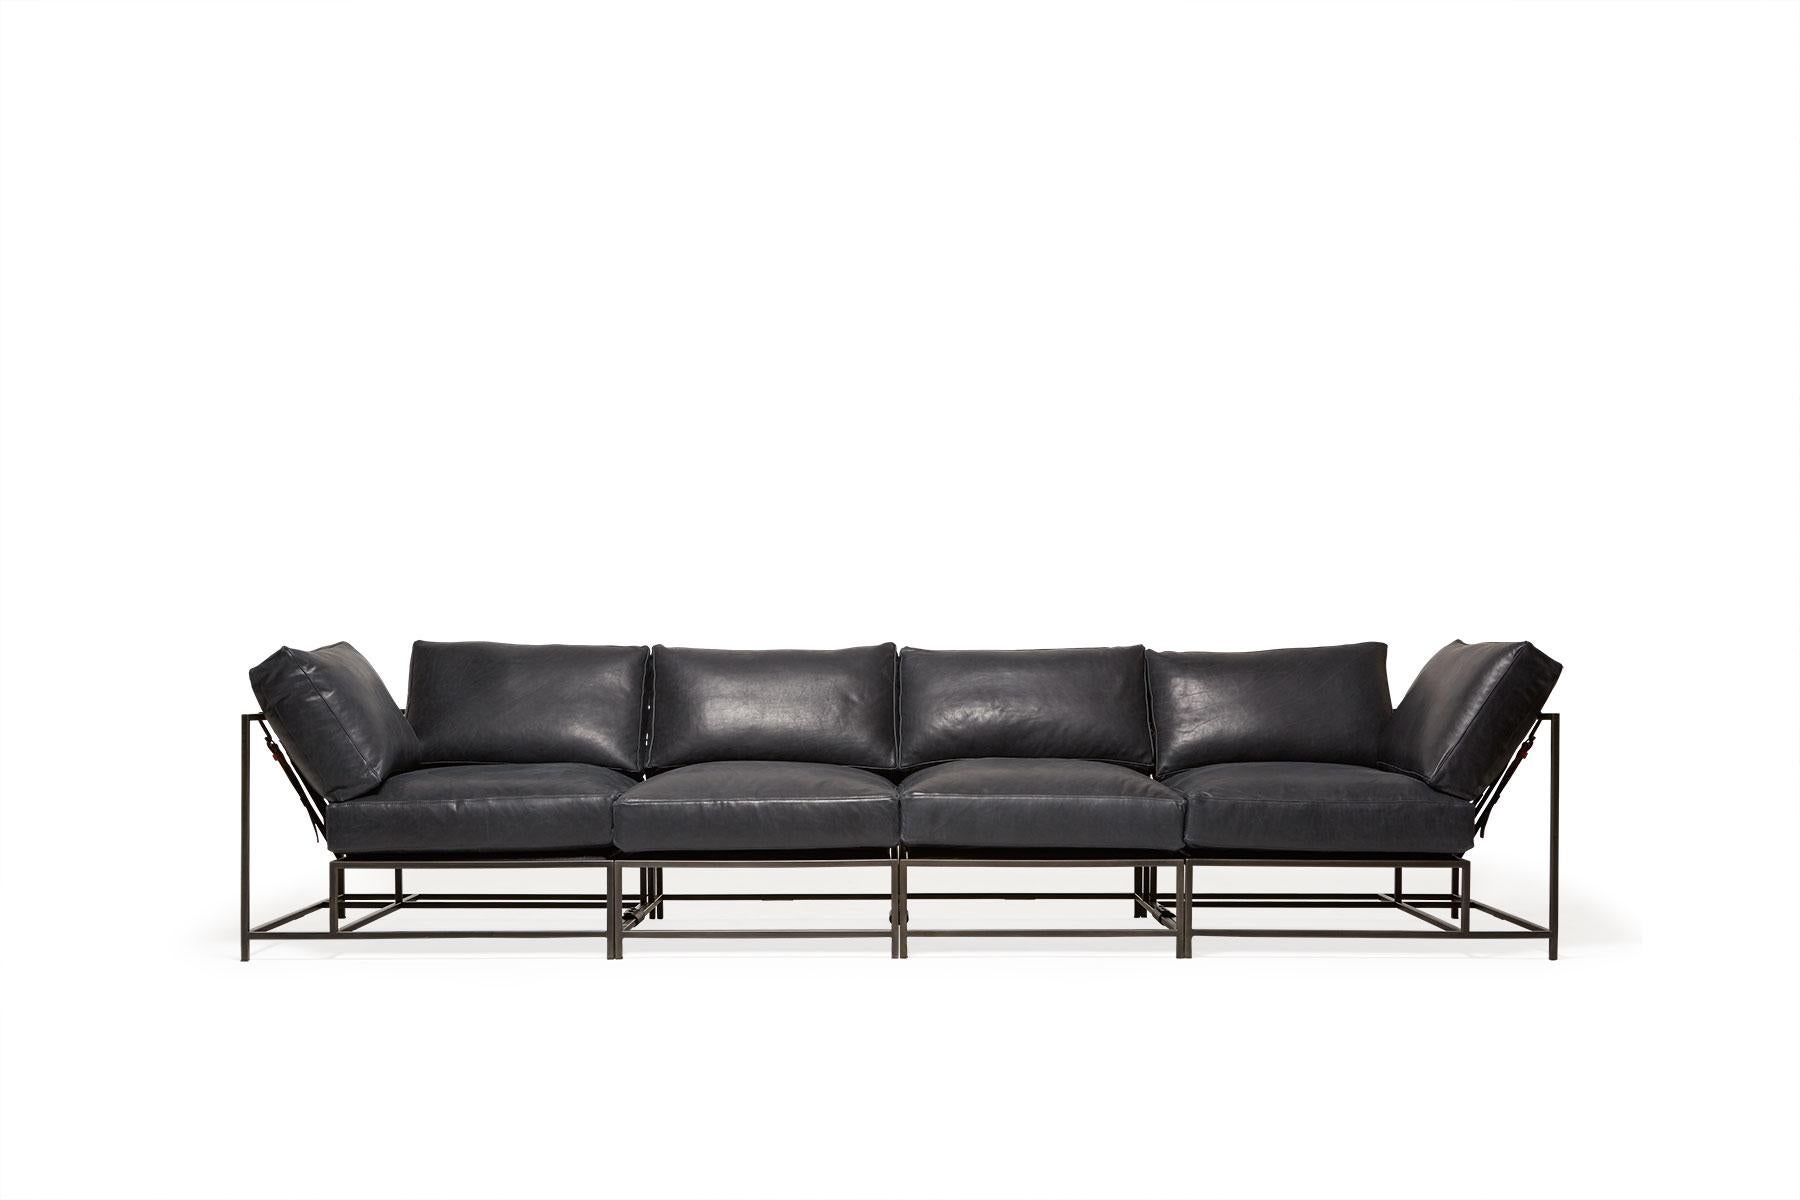 The Inheritance Sectional by Stephen Kenn is as comfortable as it is unique. The design features an exposed construction composed of three elements - a steel frame, plush upholstery, and supportive belts. The deep seating area is perfect for a